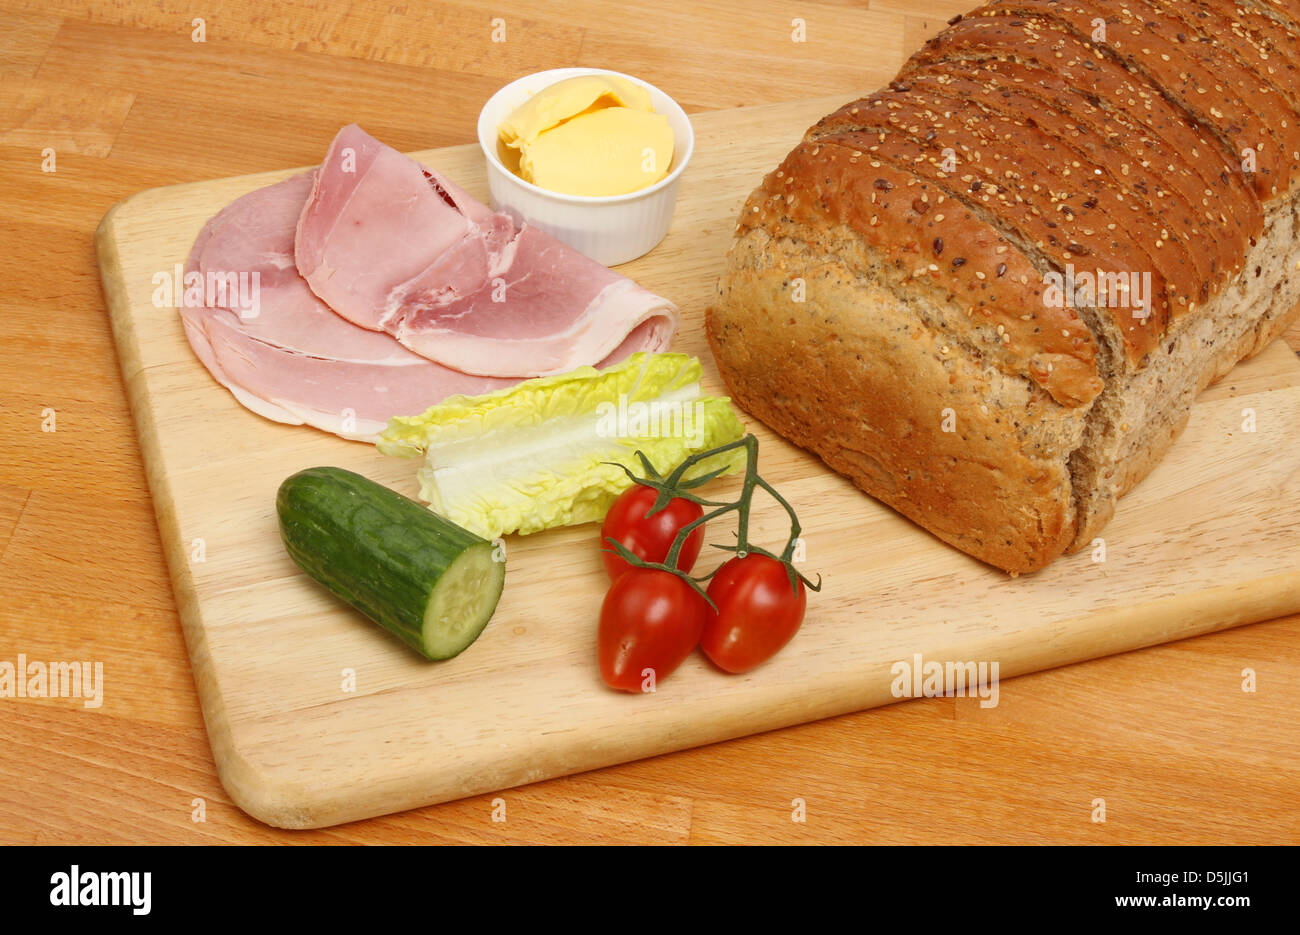 Wholemeal bread loaf and sandwich ingredients on aboard and worktop Stock Photo